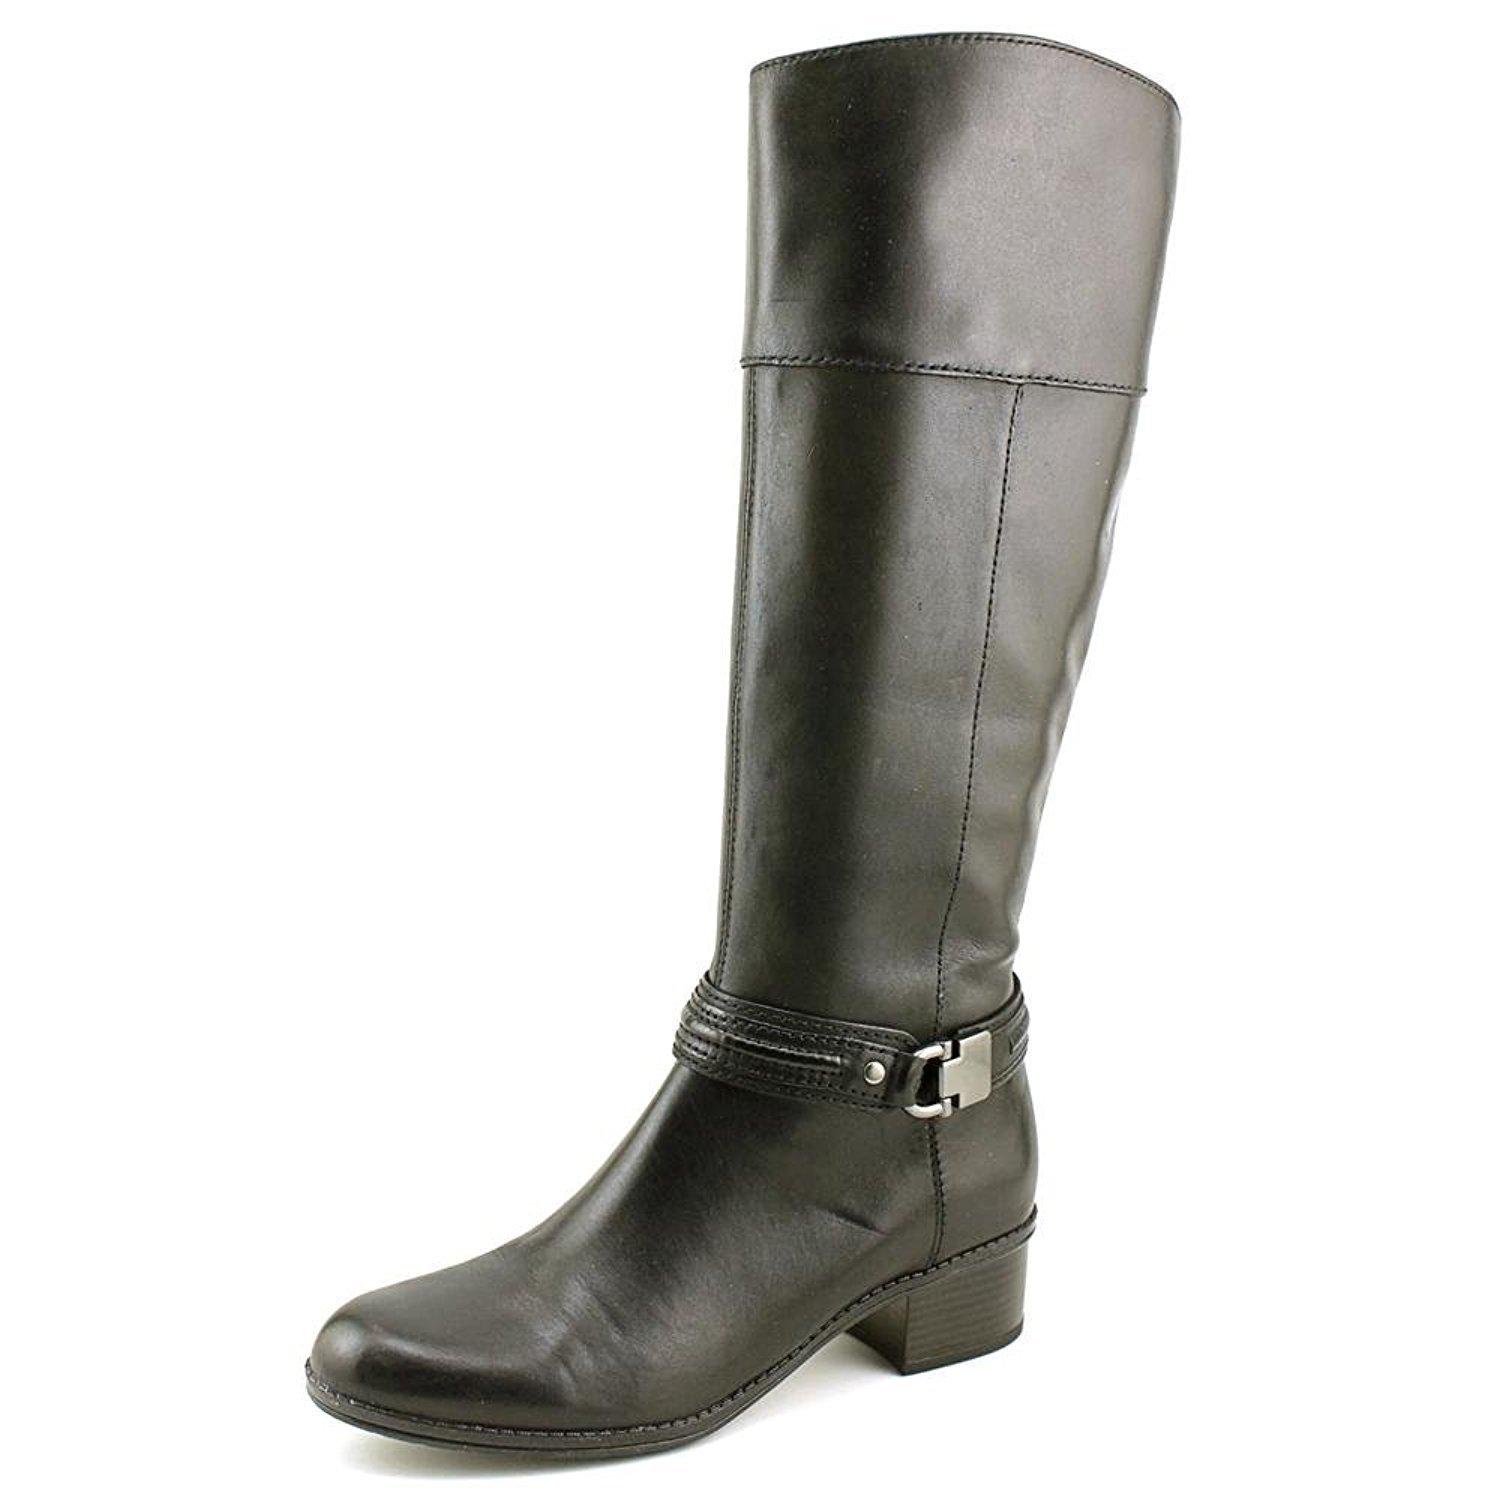 Bandolino Tall Shaft Riding Boot With Hardware At Ankle in Black | Lyst